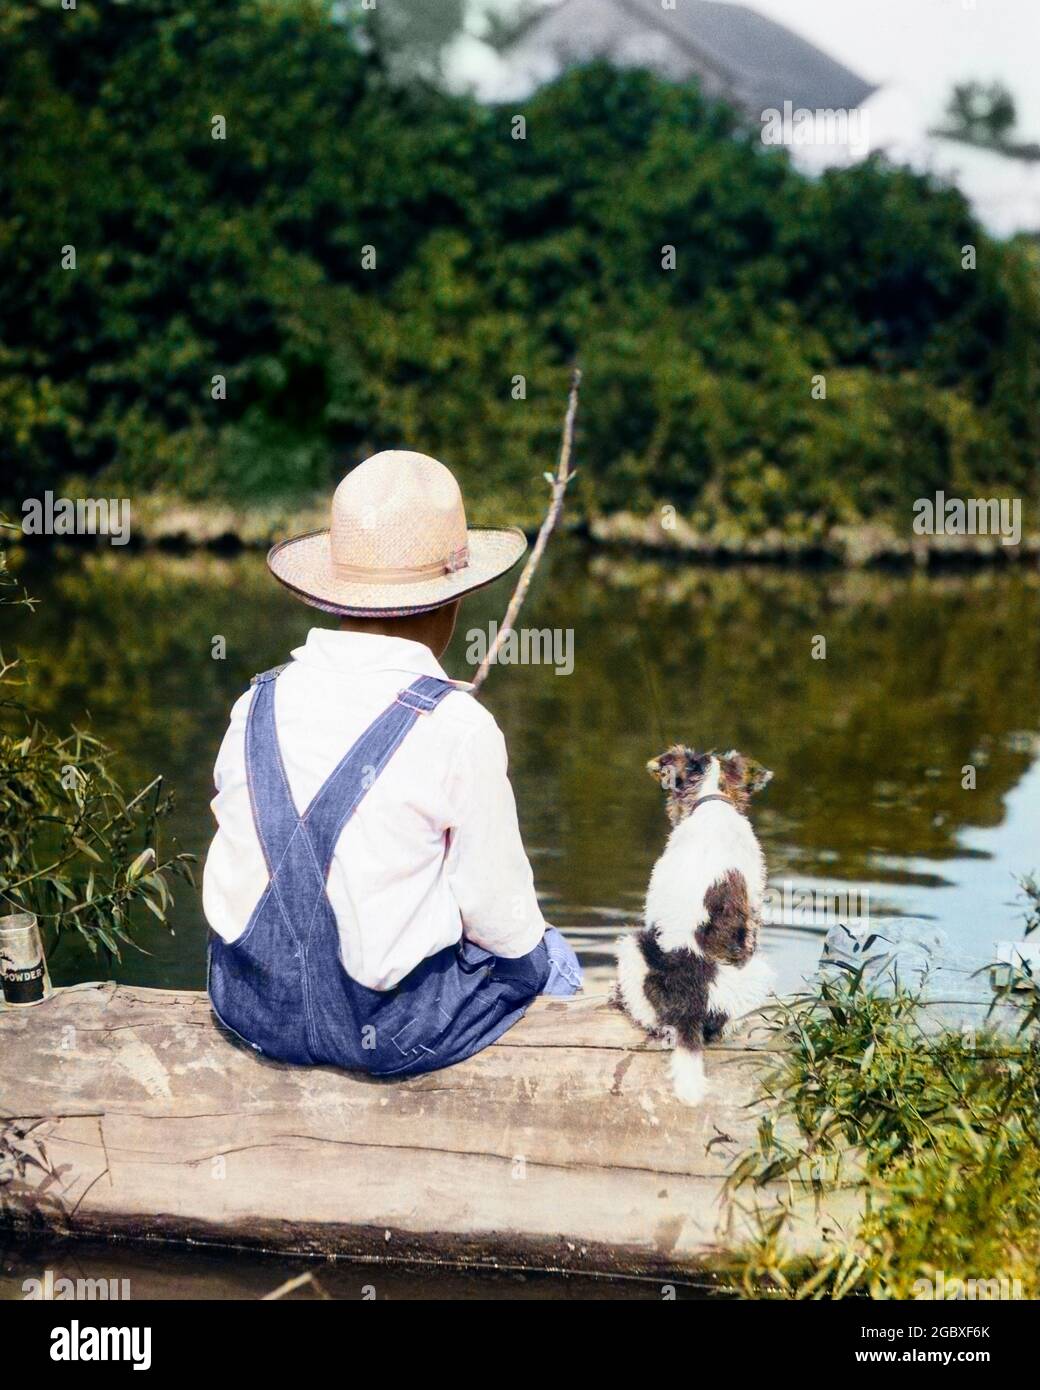 https://c8.alamy.com/comp/2GBXF6K/1920s-1930s-farm-boy-wearing-straw-hat-and-overalls-sitting-on-log-with-spotted-dog-fishing-in-pond-a4779c-har001-hars-nostalgia-old-fashion-1-juvenile-pole-friend-pond-teamwork-hole-edge-lifestyle-fisherman-moody-rural-home-life-copy-space-catch-friendship-half-length-persons-quiet-overalls-sit-stream-males-rod-americana-denim-catching-terrier-reflect-adventure-hobby-leisure-log-hope-recreation-expectation-pal-pastime-rear-view-barefoot-mood-connection-blue-jean-trusting-companion-angling-best-friend-solitary-mutt-patience-solitude-back-view-canine-jean-juveniles-loyal-loyalty-pup-ritual-2GBXF6K.jpg